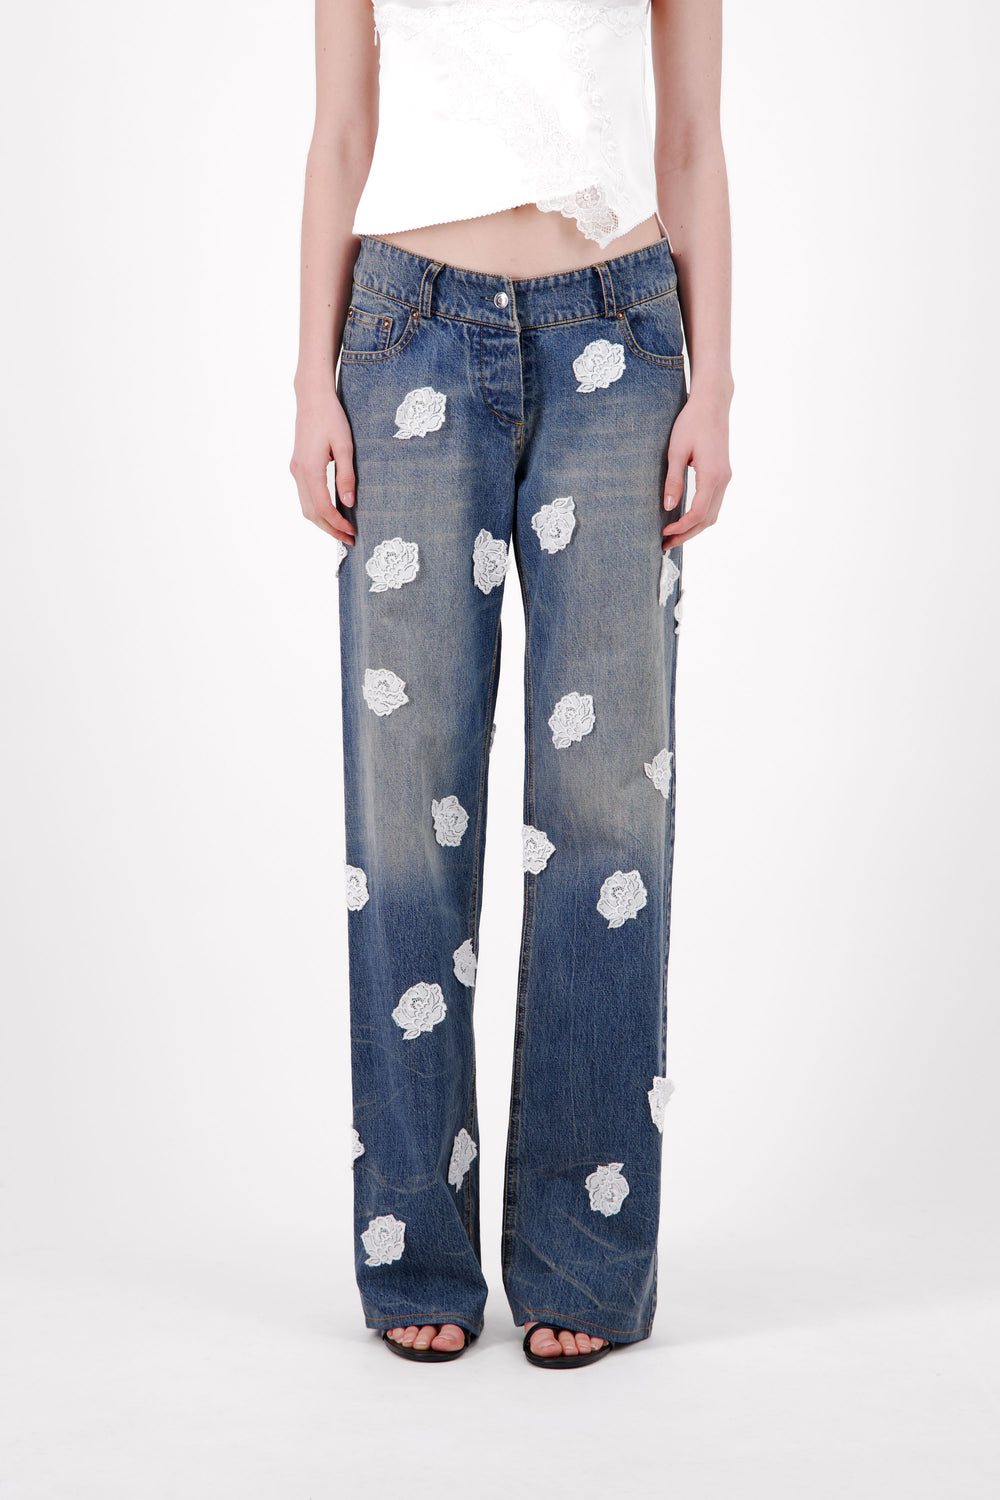 V-Shape Waist Washed And Stained Denim Jeans W/ Lace Polka Dots